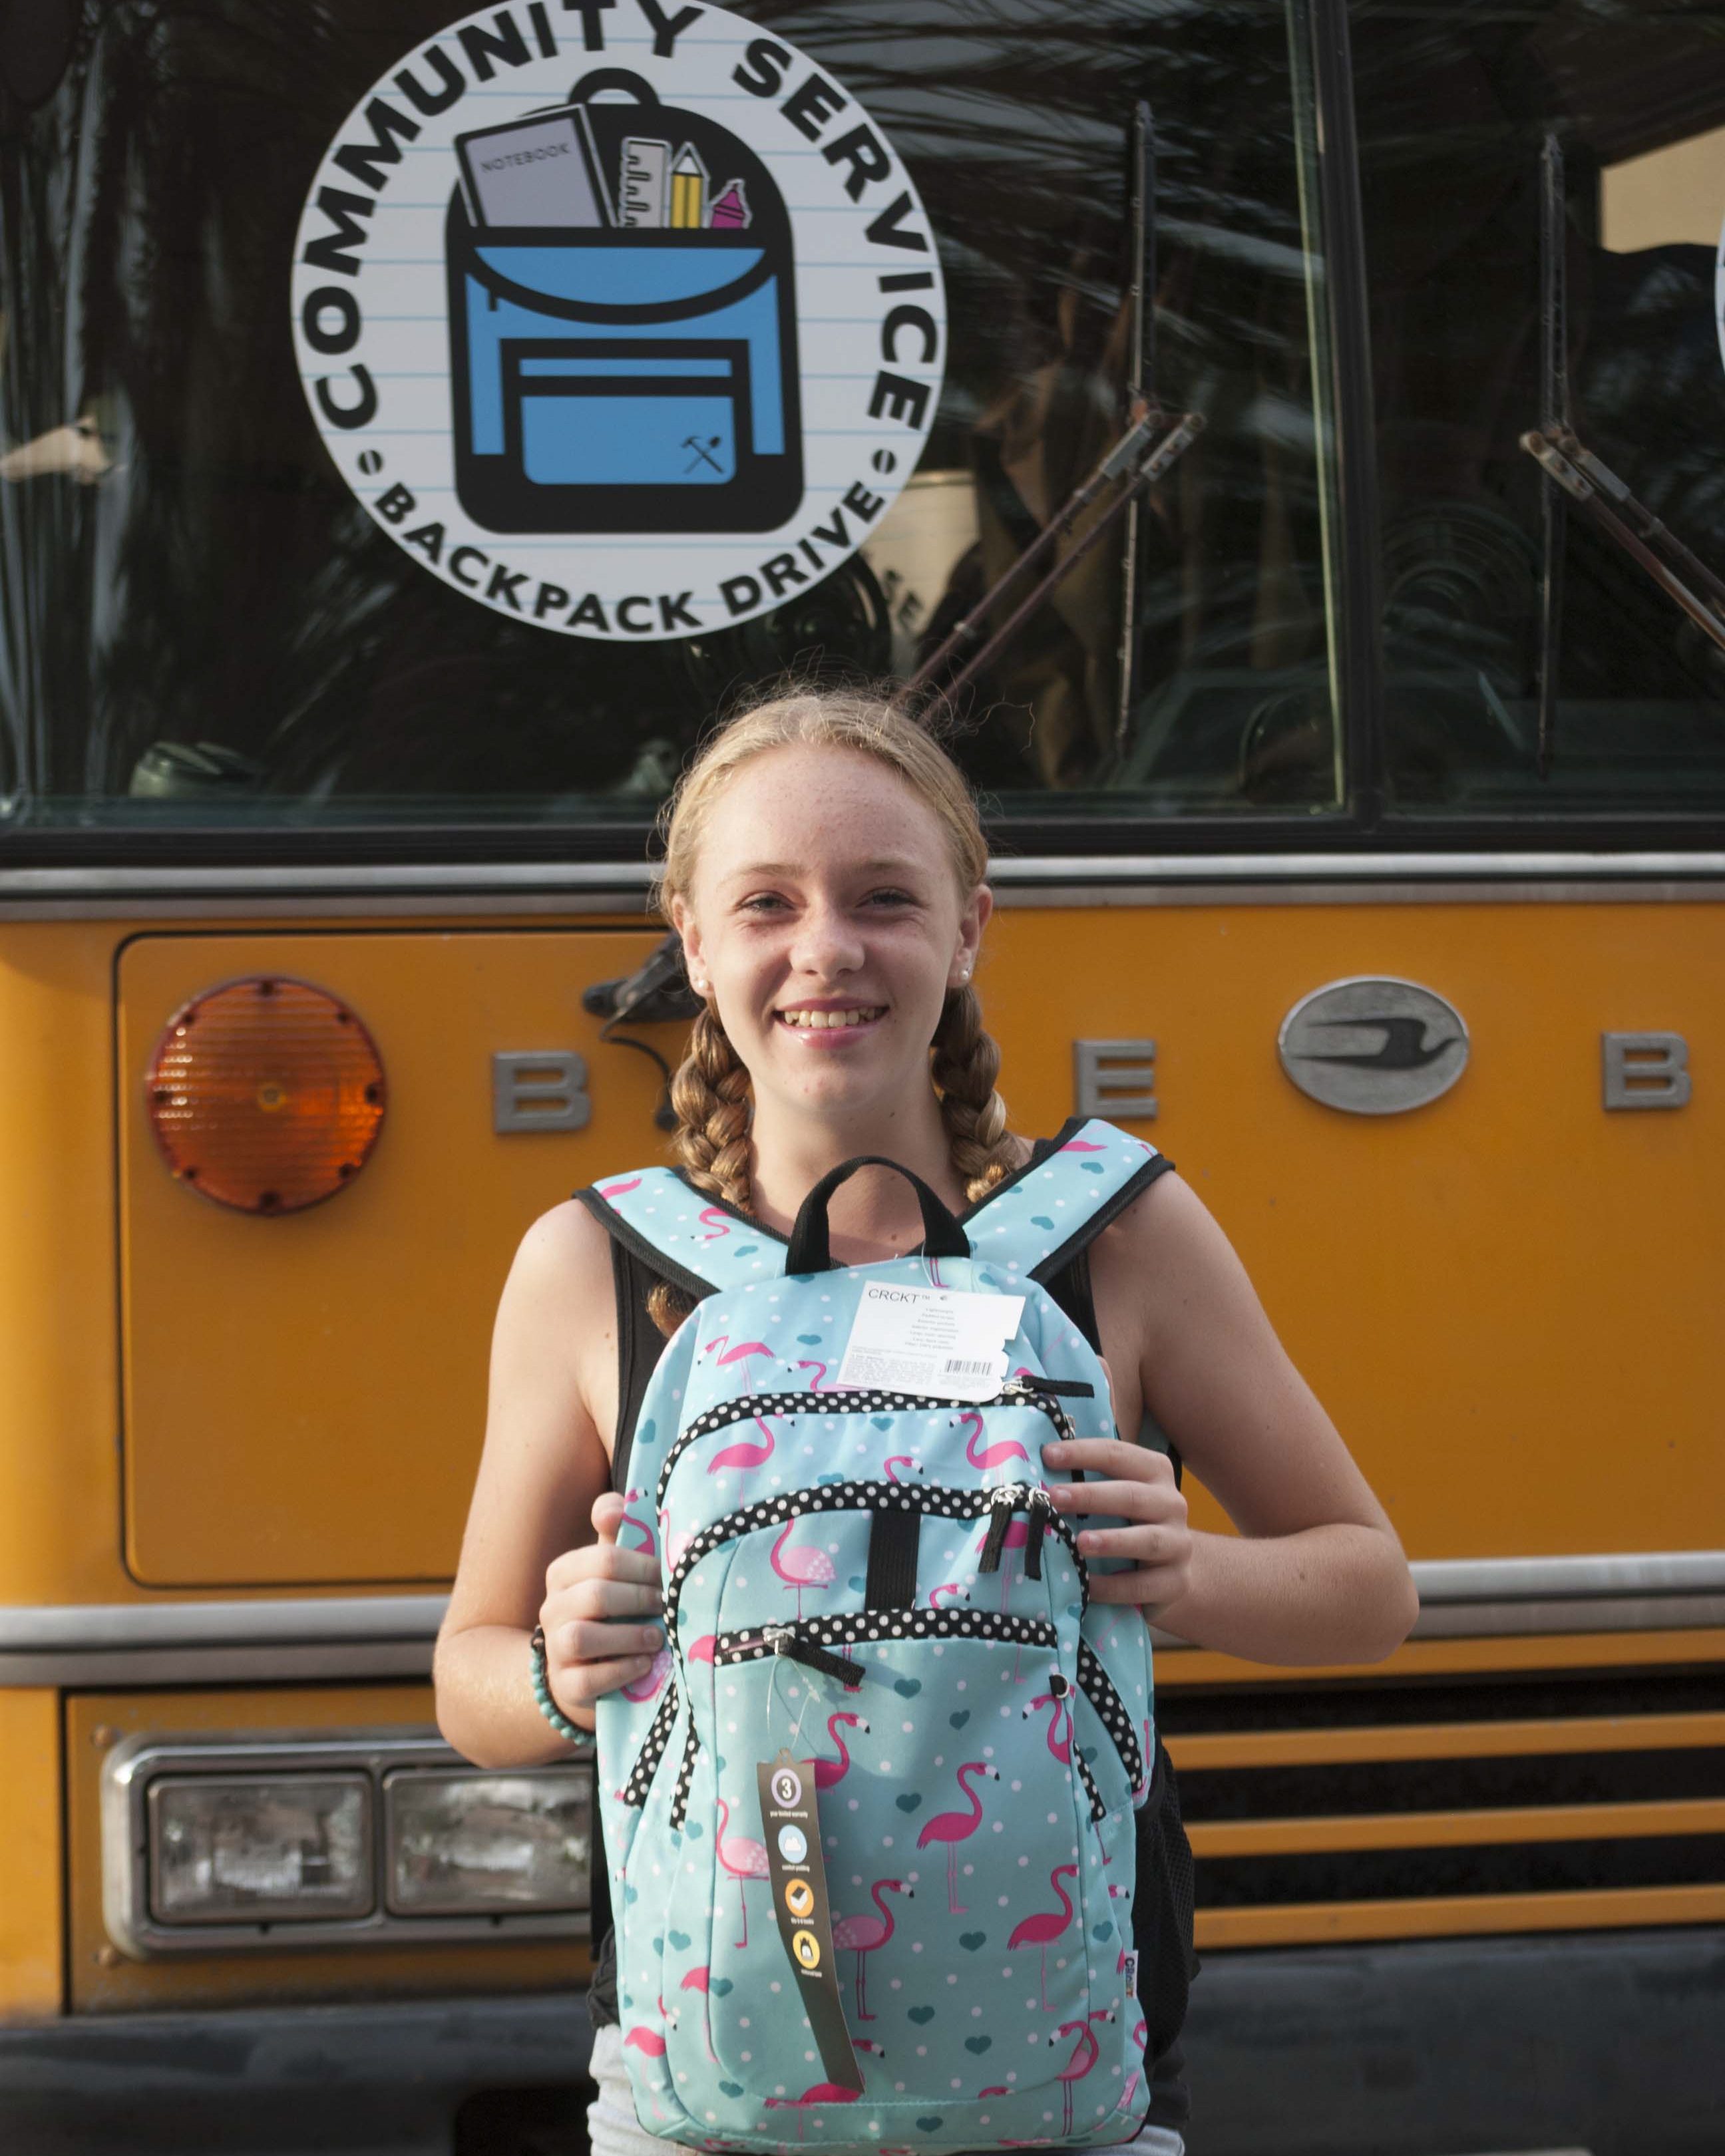 Backpack Drive - Collect & Sort Donations - Sat. 8/8 - 8:30am-11:30am - SHIFT #1